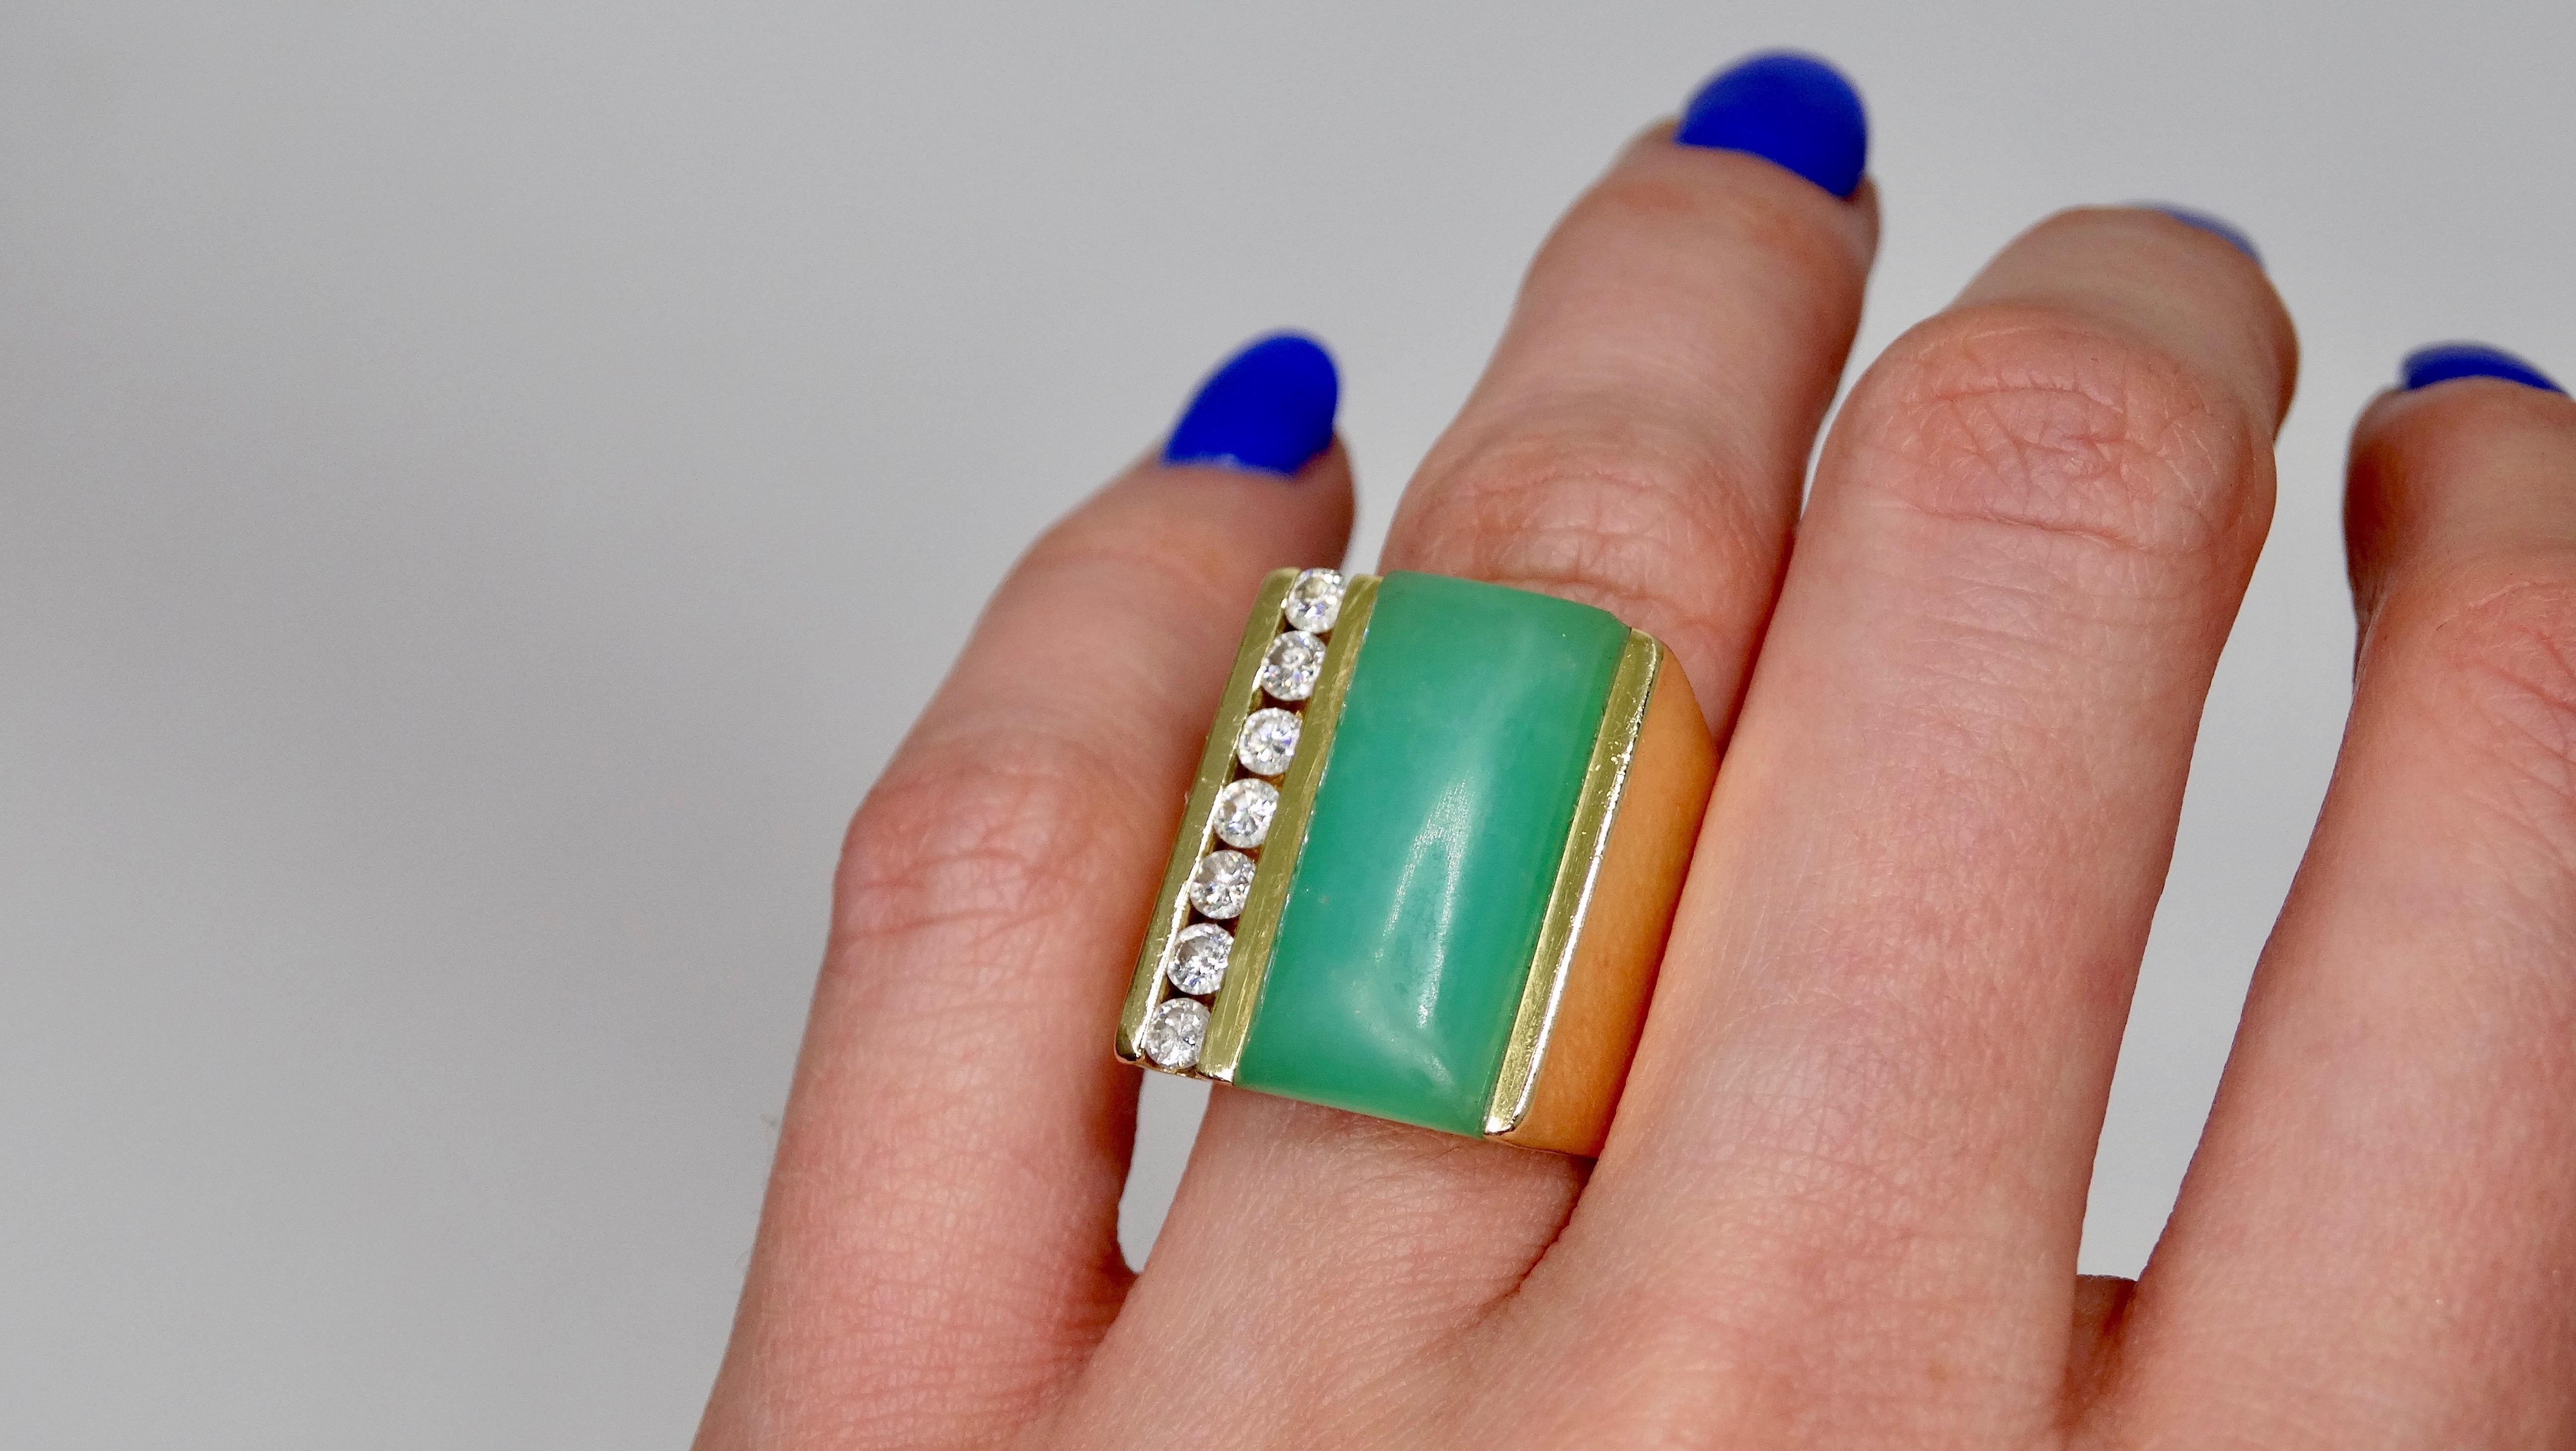 Elevate your look with this stunning cocktail ring! Circa mid-20th century, this 18k Gold ring features a thick band set with a beautifully polished Jade stone and single row of brilliant round cut Diamonds. Interior of band is stamped 18k Gold and